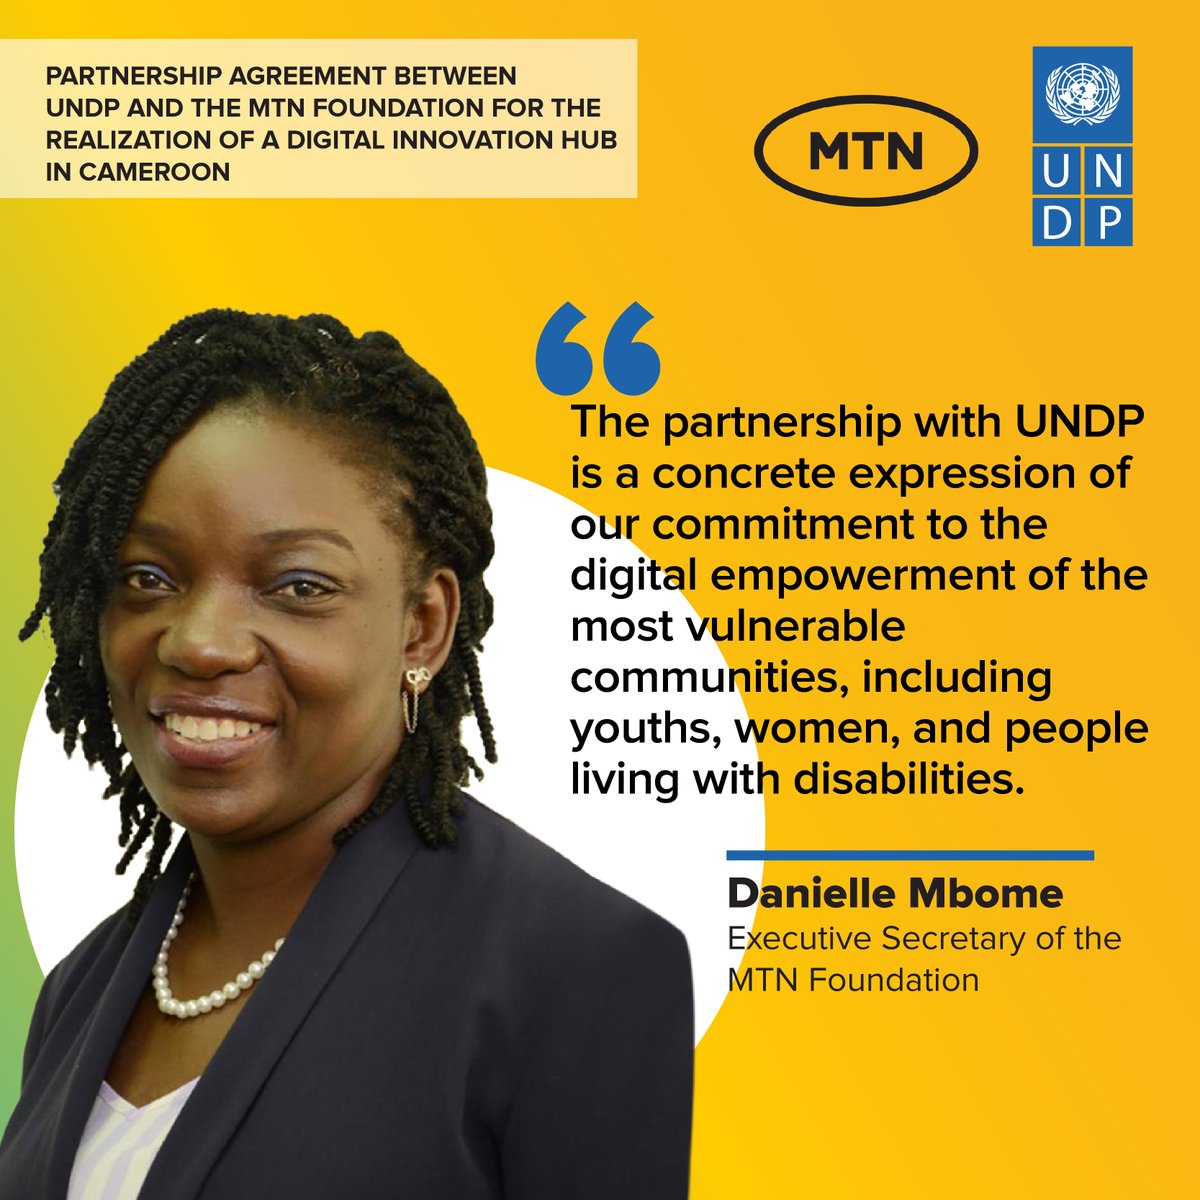 For @DanEFOULA, Executive Secretary of the @MTNFoundation, the partnership w/@PNUDCameroun underlines  the Foundation’s commitment to the digital empowerment of the most vuln. communities, including youths, women, & people living w/ disabilities. #DoingGoodTogether #SDG9 #SDG17